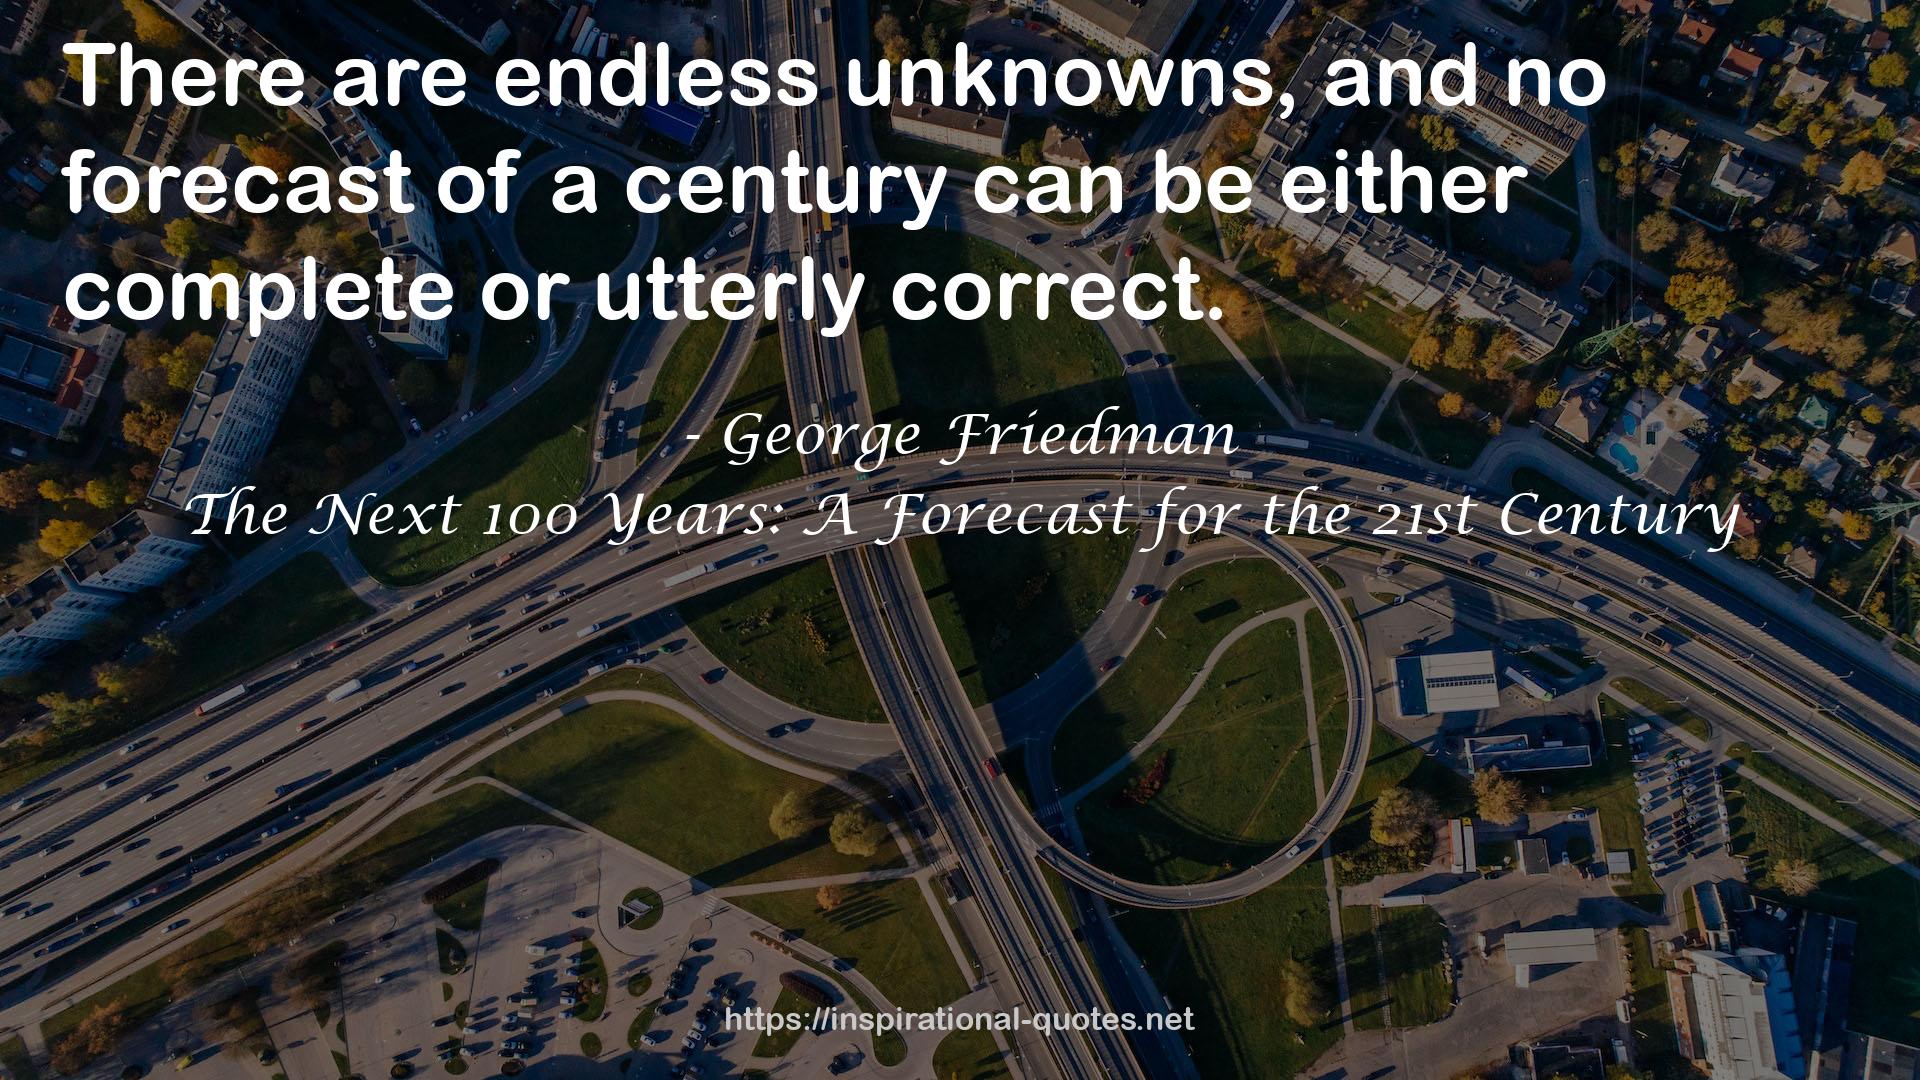 The Next 100 Years: A Forecast for the 21st Century QUOTES